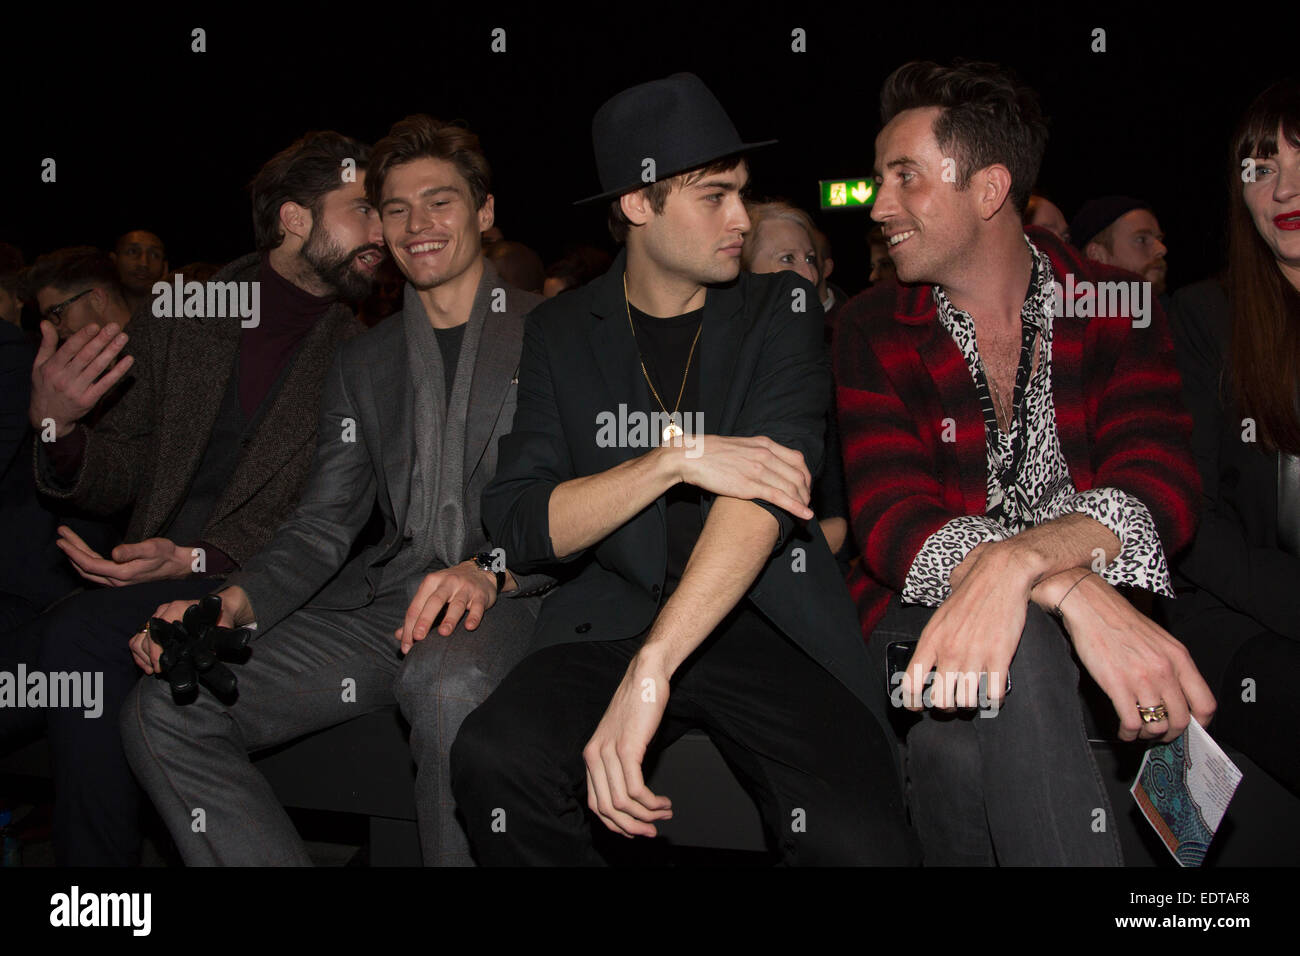 London, UK. 9 January 2015. Pictured: Jack Guinness, Oliver Cheshire, Douglas Booth and Nick Grimshaw. Front row celebrities. The runway show of Topman Design at the Topshow Show Space: The Old Sorting Office opens the London Collections: Men fashion week in London. Photo: CatwalkFashion/Alamy Live News Stock Photo